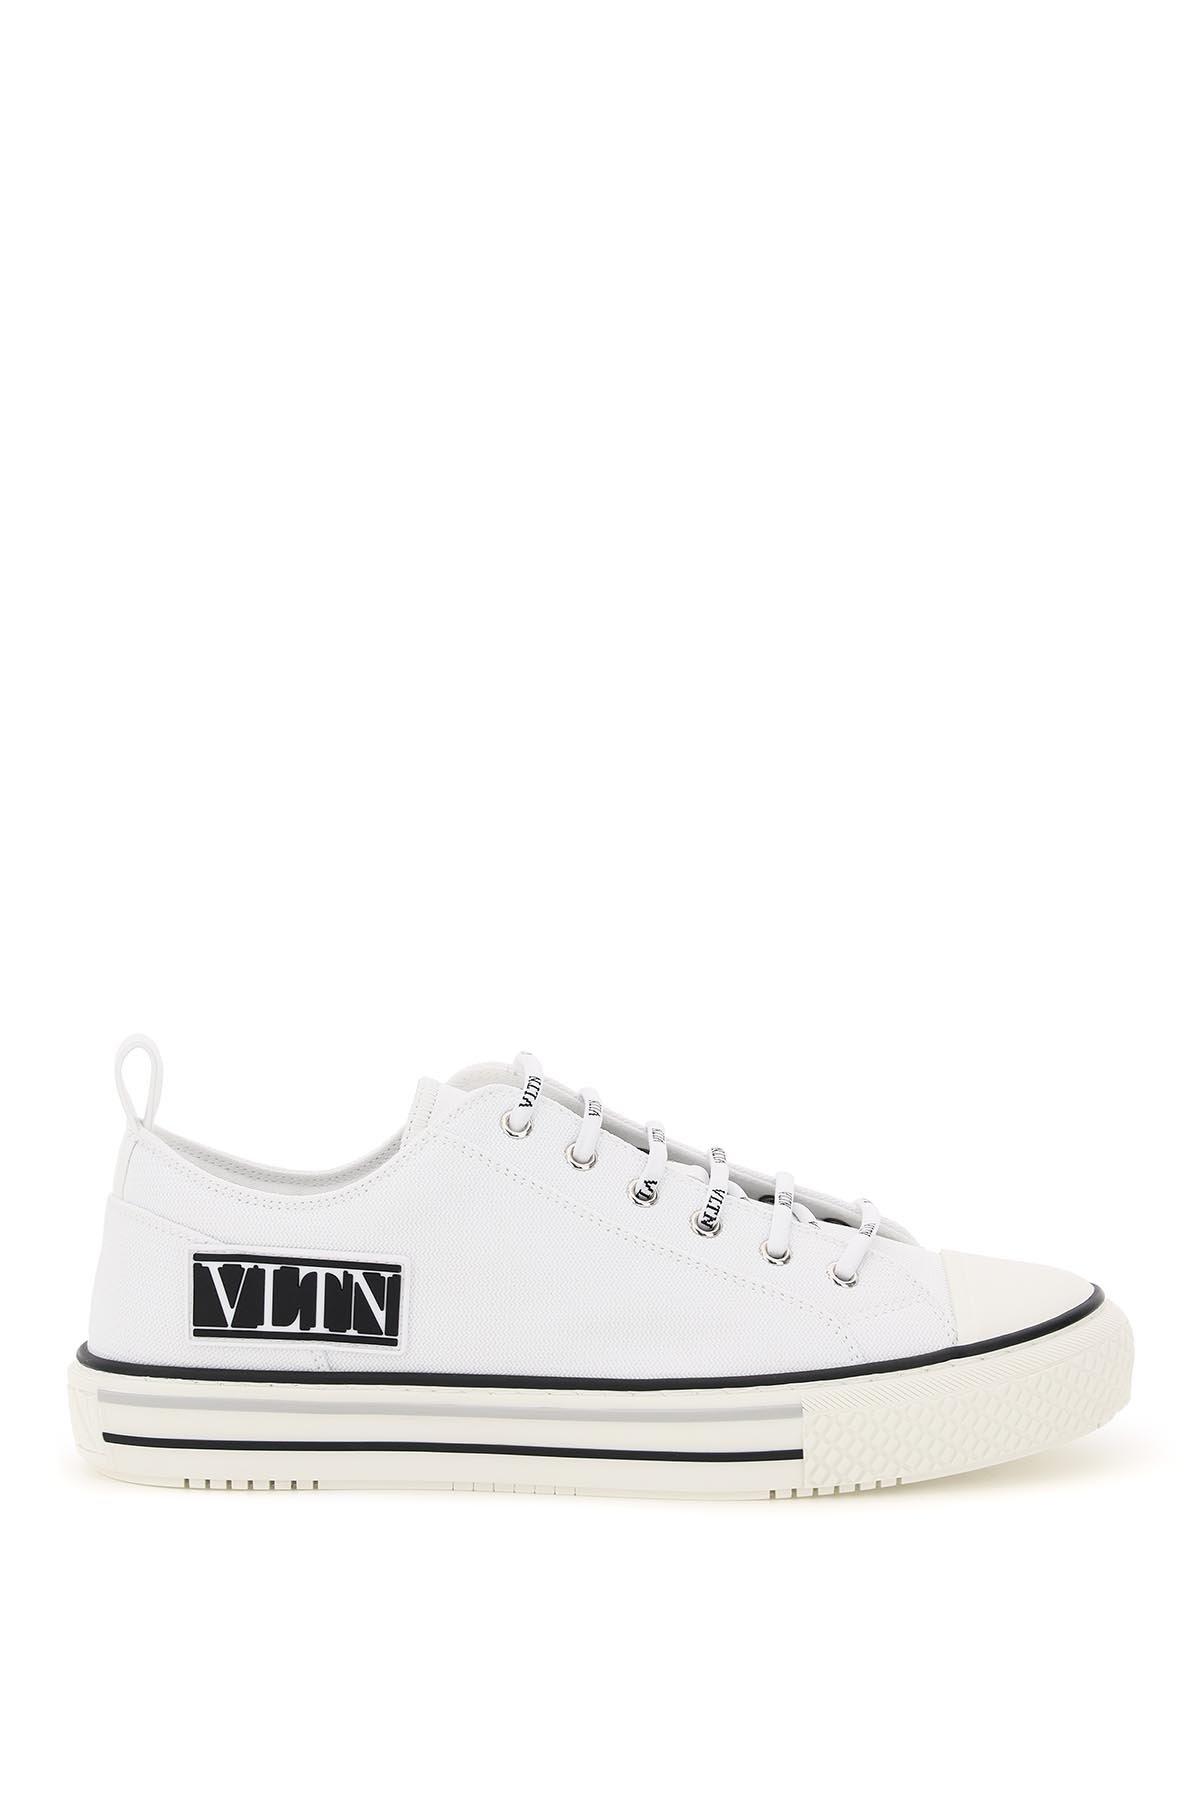 Valentino Rubber Vltn Giggies Low-top Sneakers in White for Men - Lyst